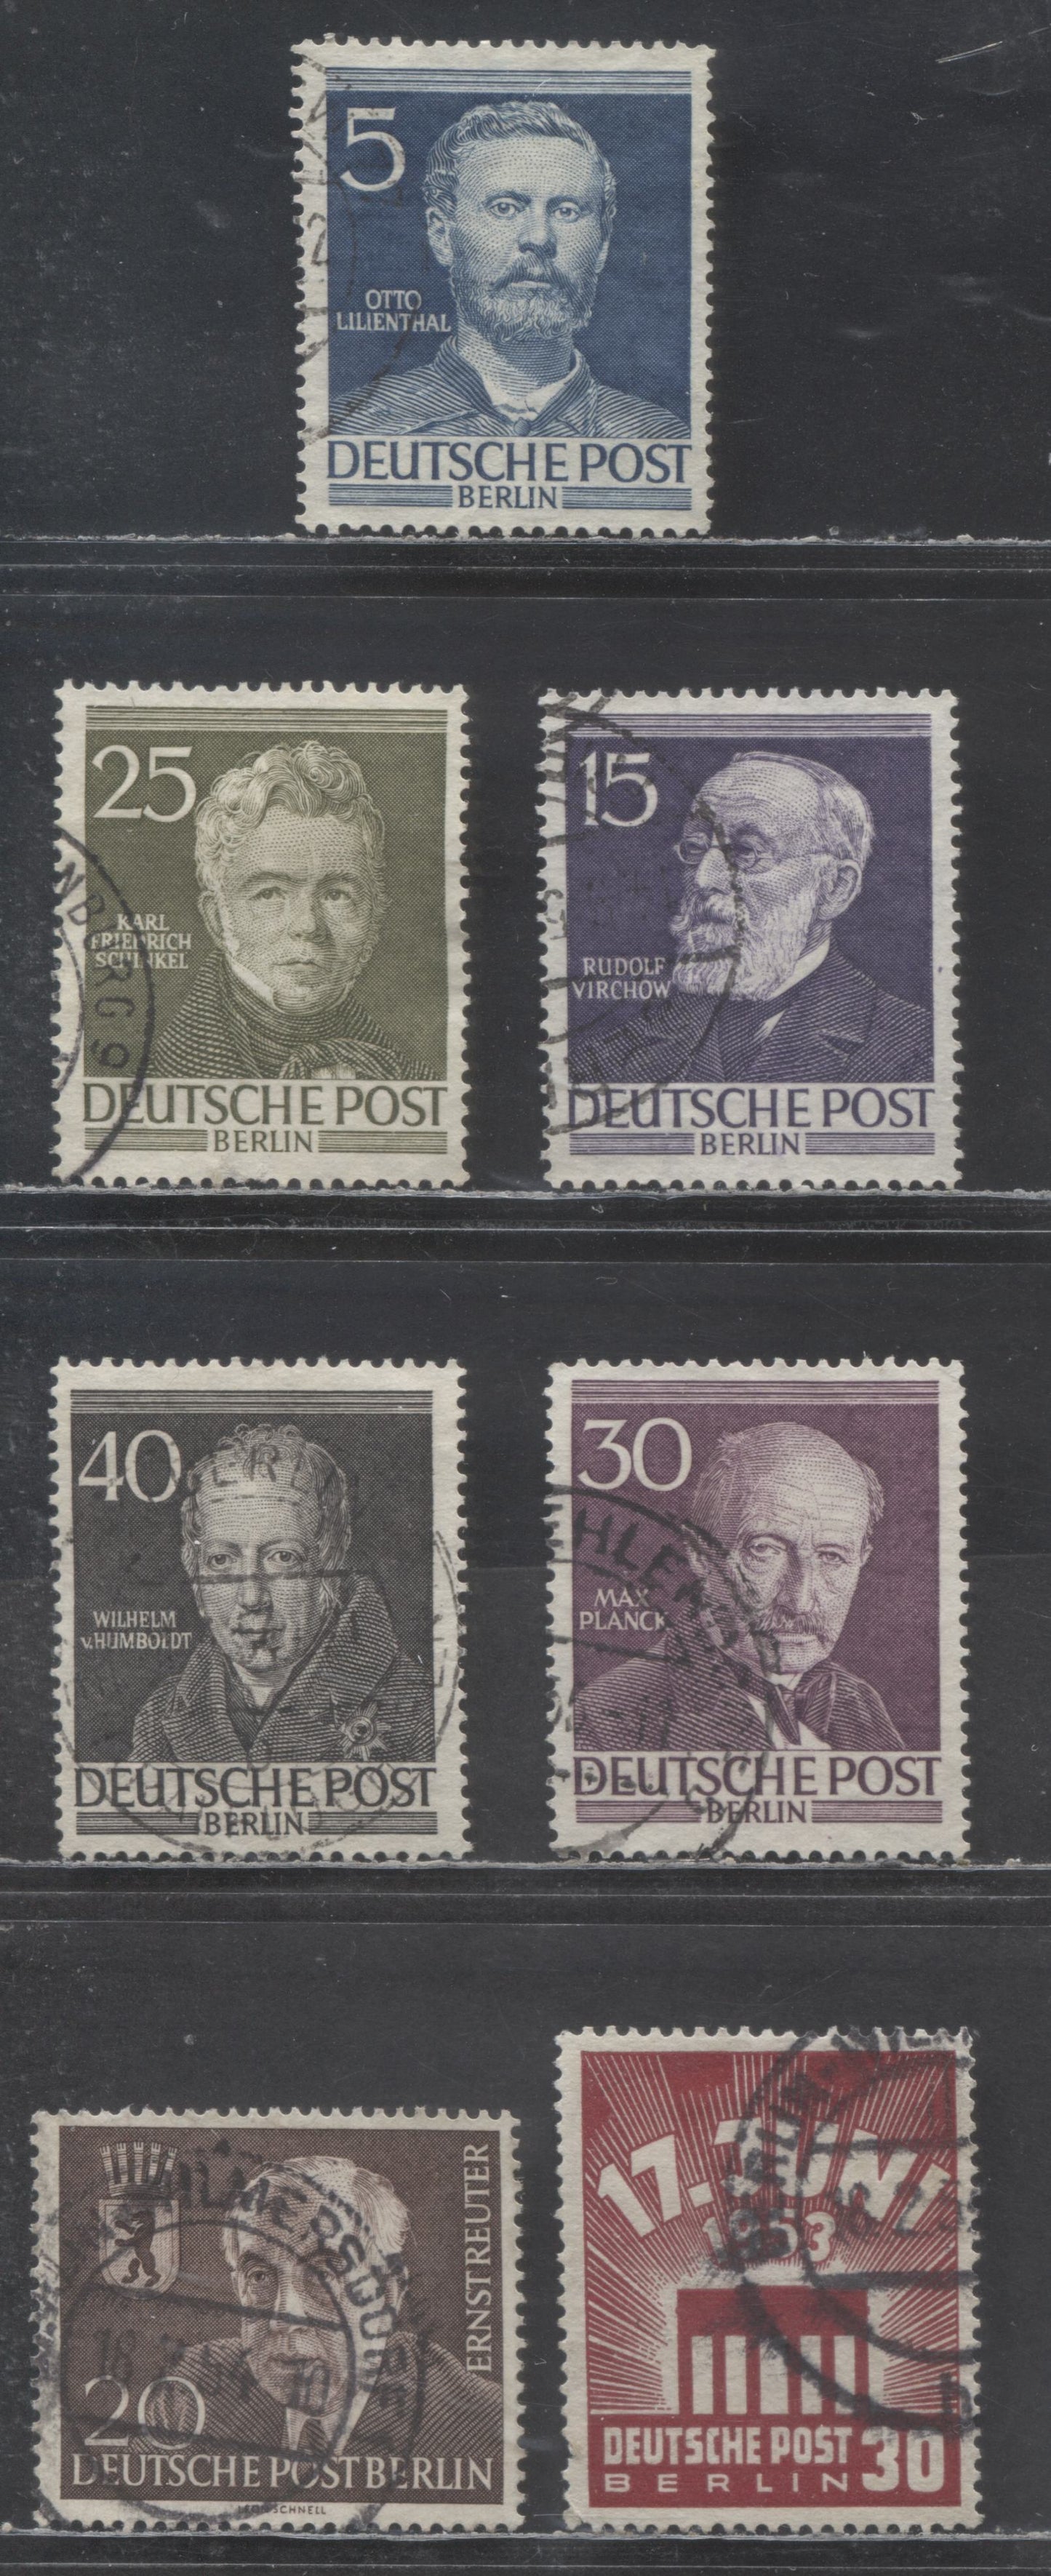 Lot 44 Germany - Berlin SC#9N85/9N104 1952-1954 Portraits - Erst Reuter Issues, 7 Fine/Very Fine Used Singles, Click on Listing to See ALL Pictures, Estimated Value $26